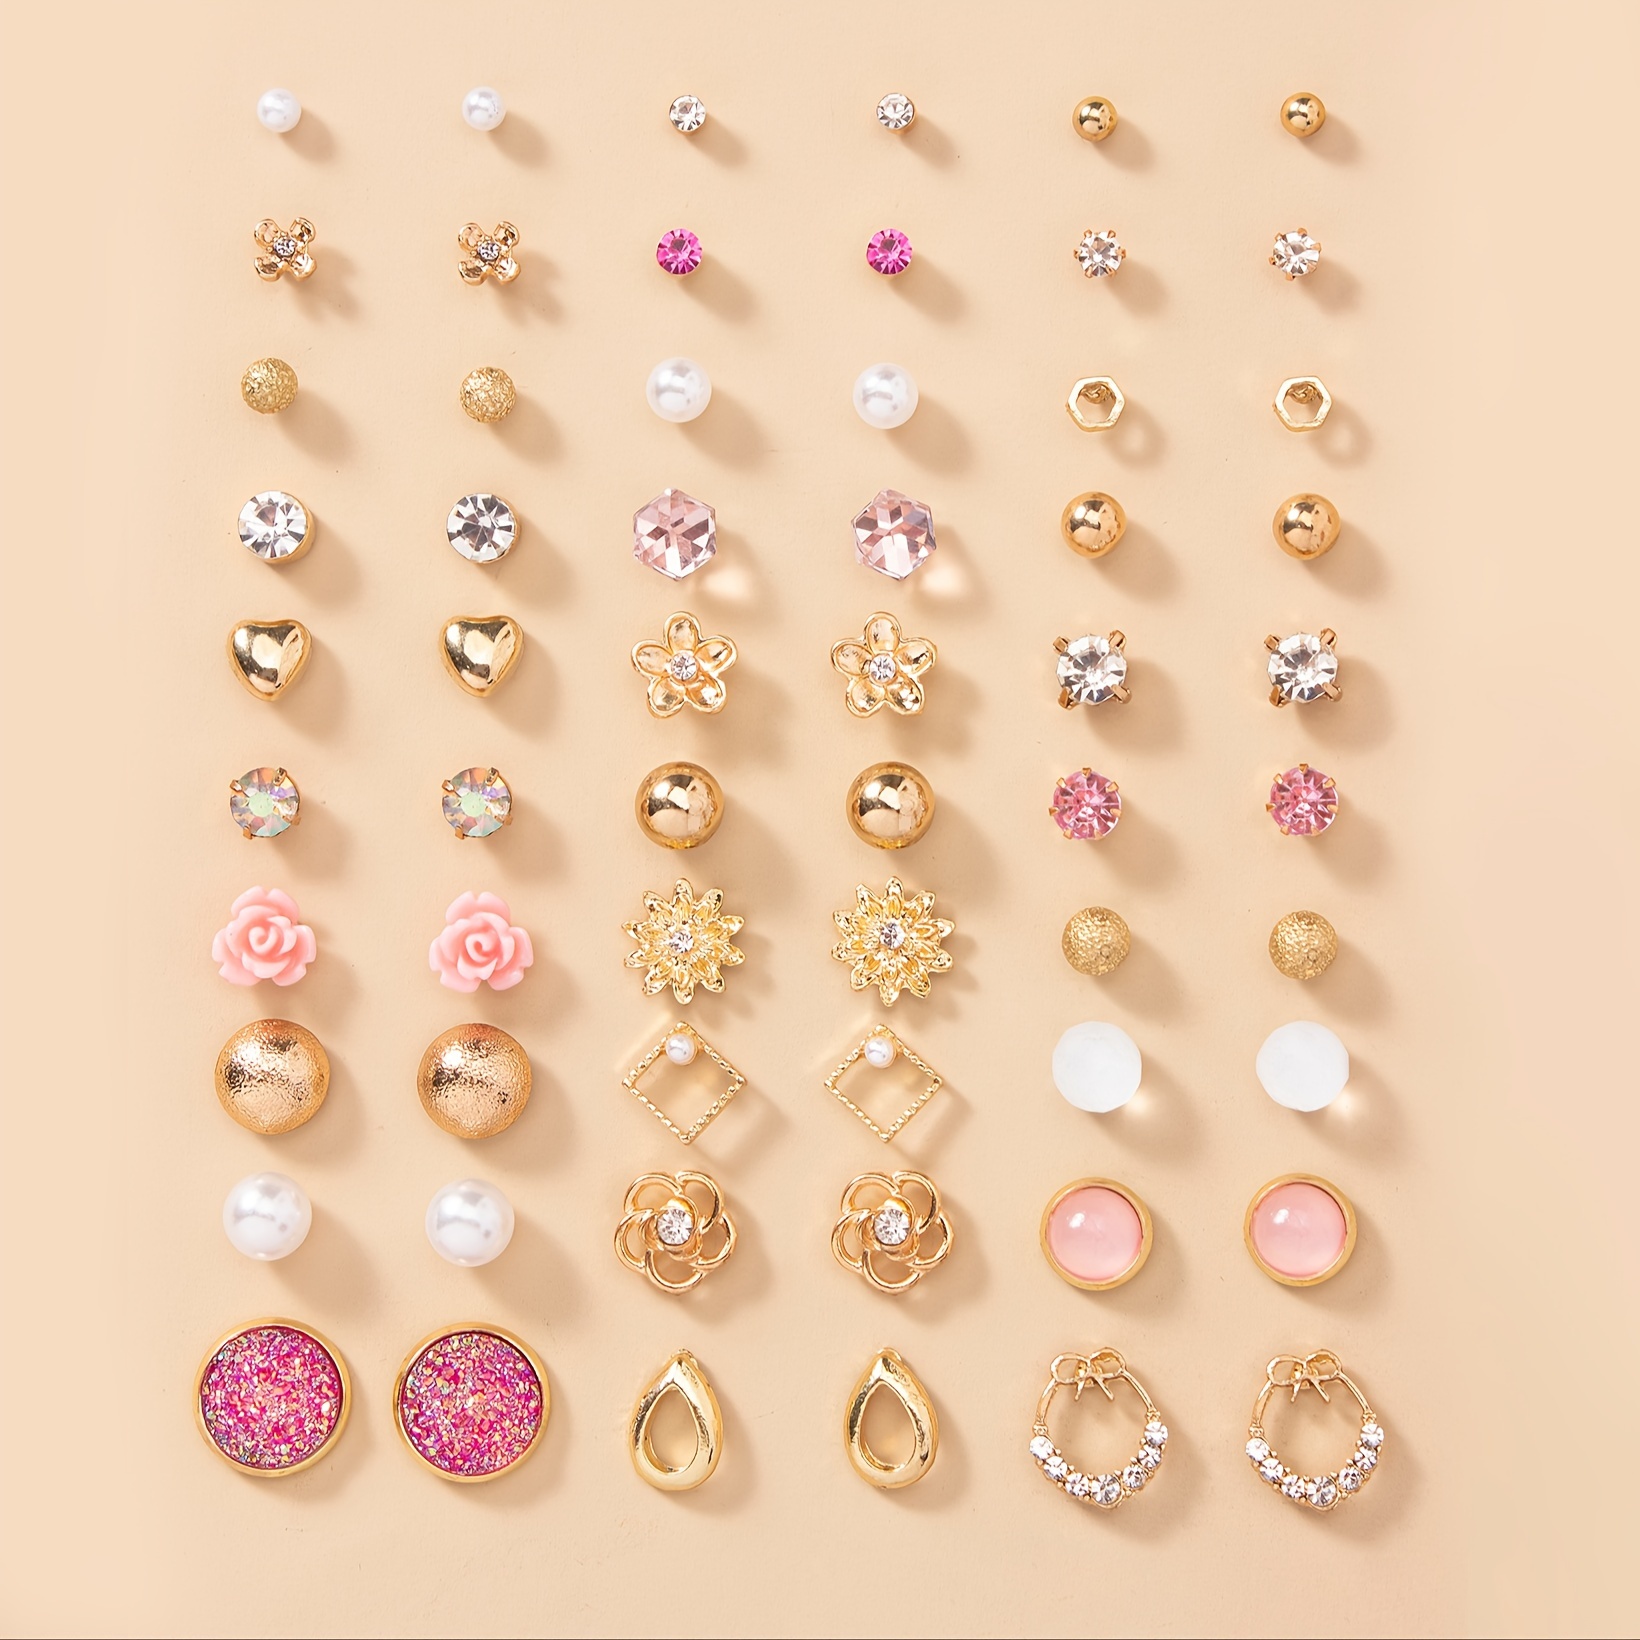 

30 Pairs Set Of Stud Earrings Zinc Alloy Jewelry Embellished With Rhinestones Elegant Simple Style For Women Daily Wear